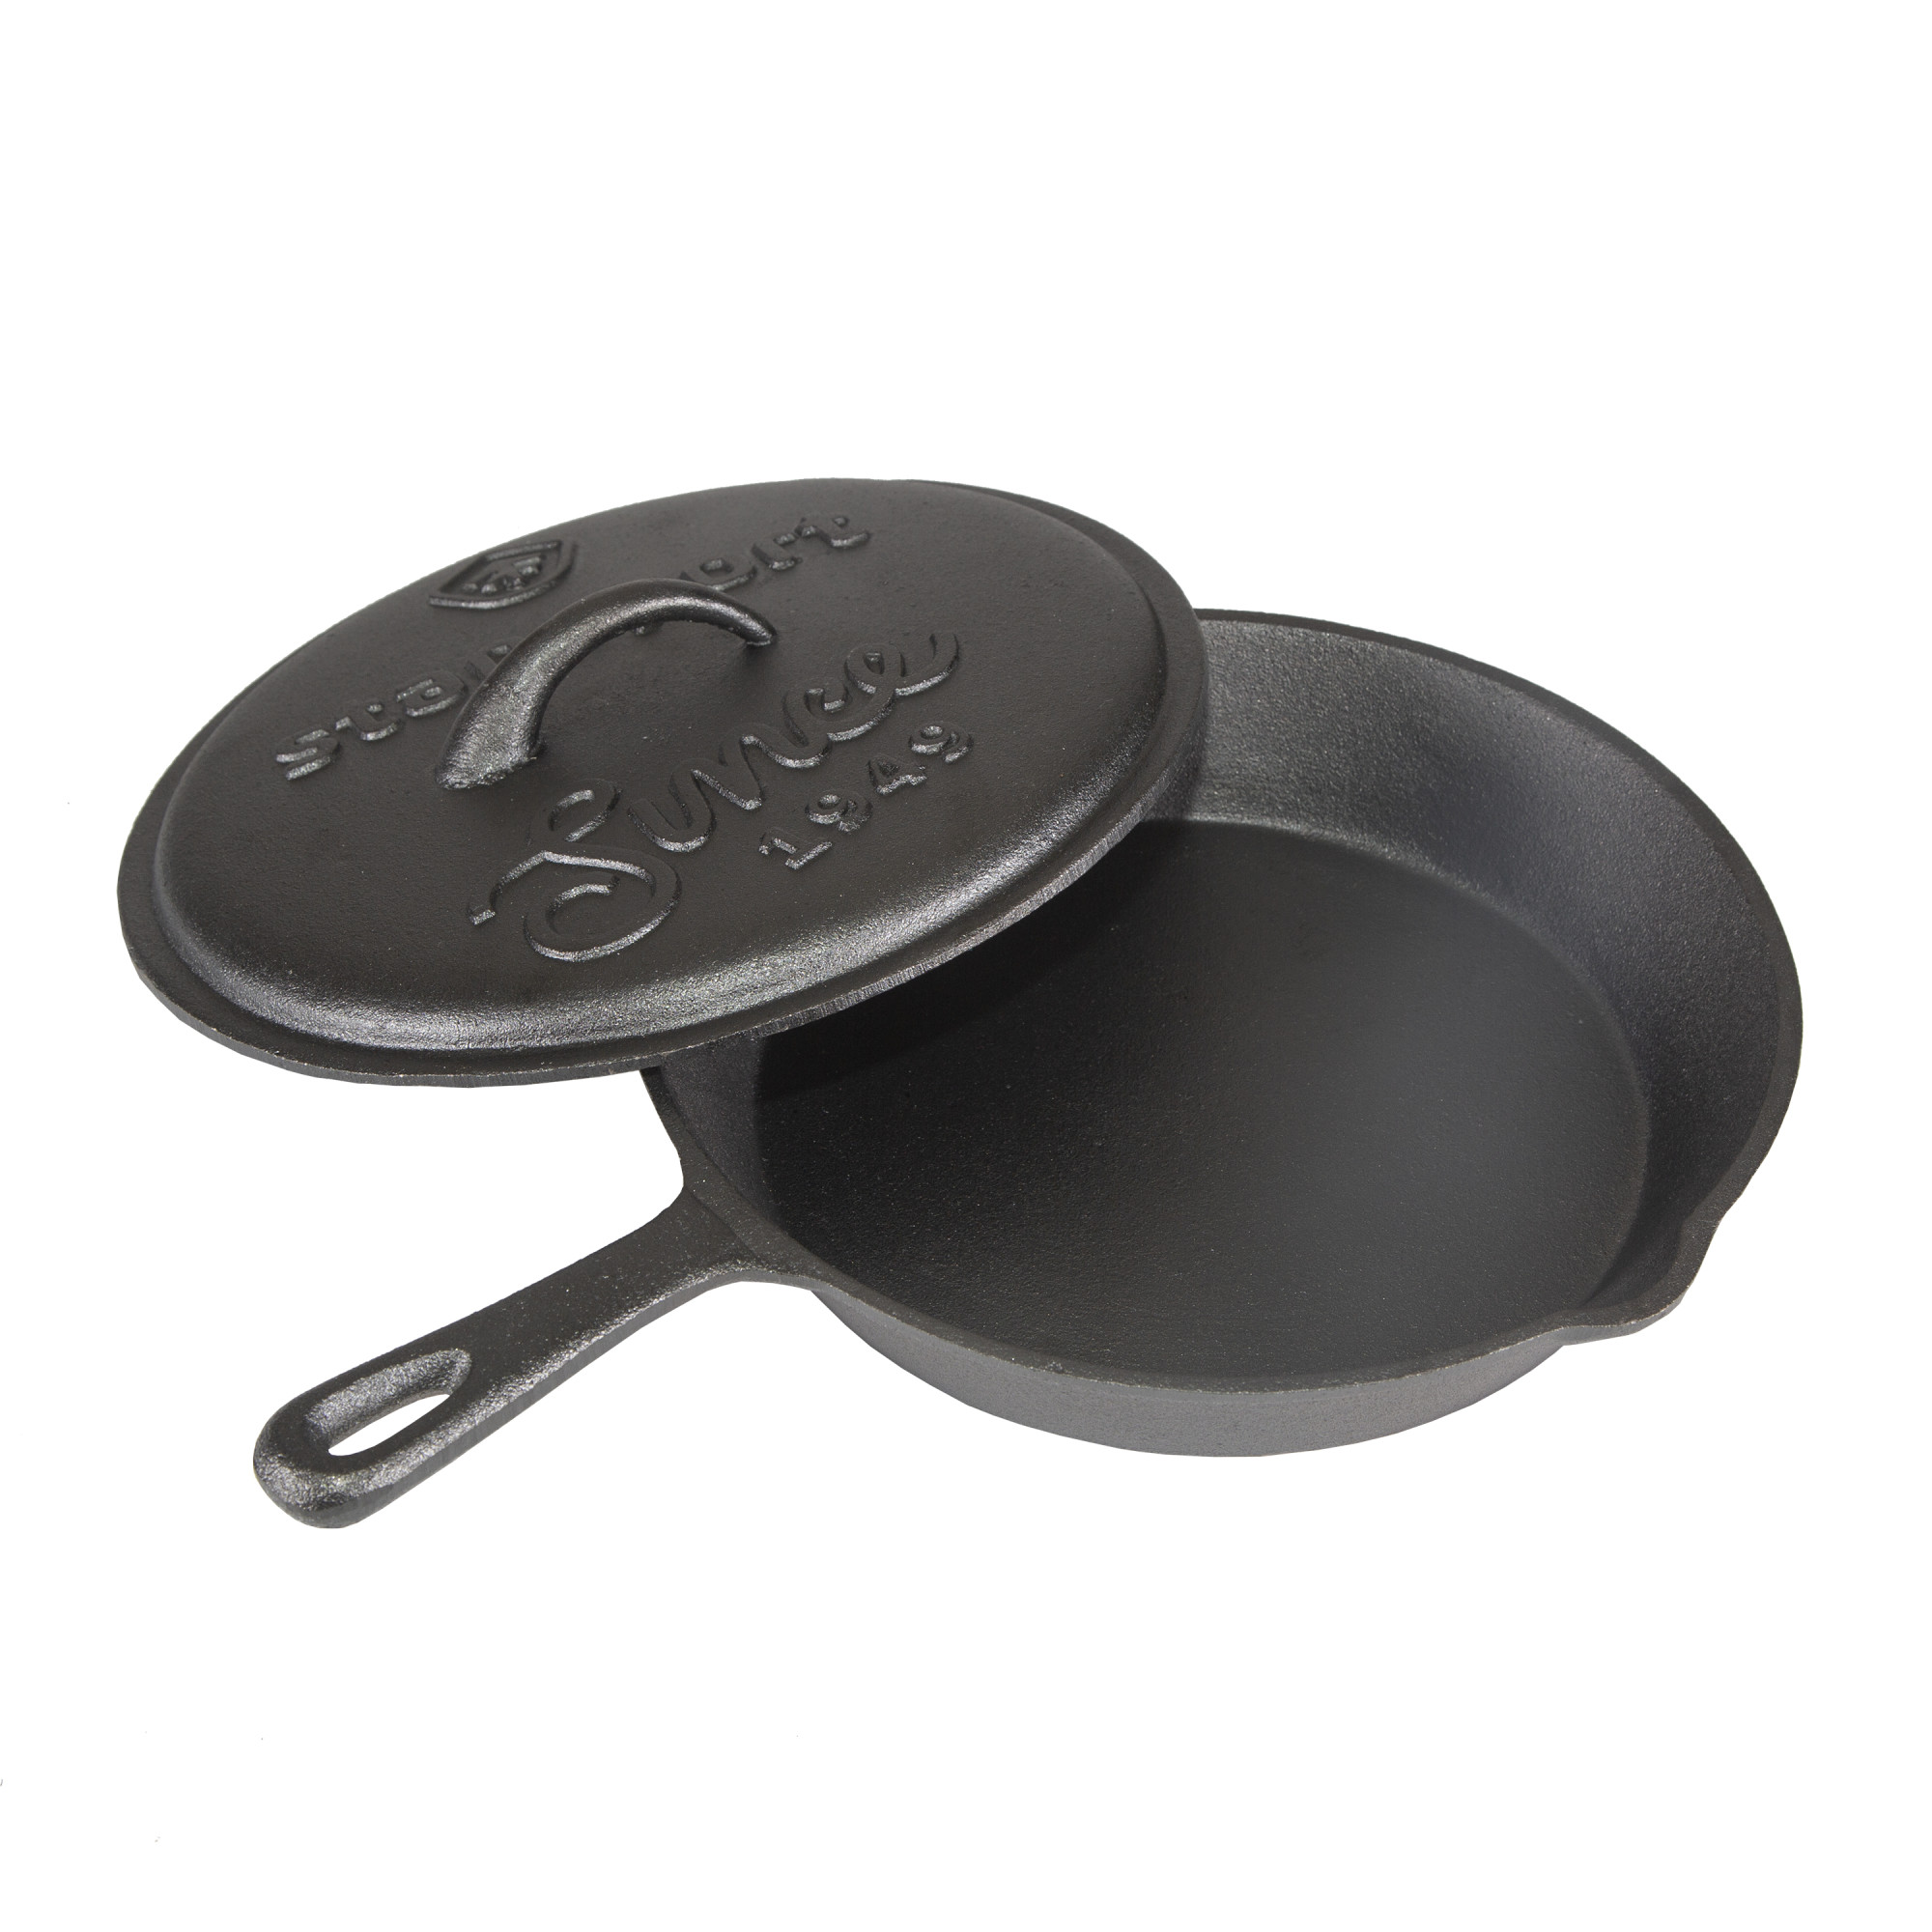 Stansport 6 Pieces Cast Iron Camping Mess Kits - image 5 of 29